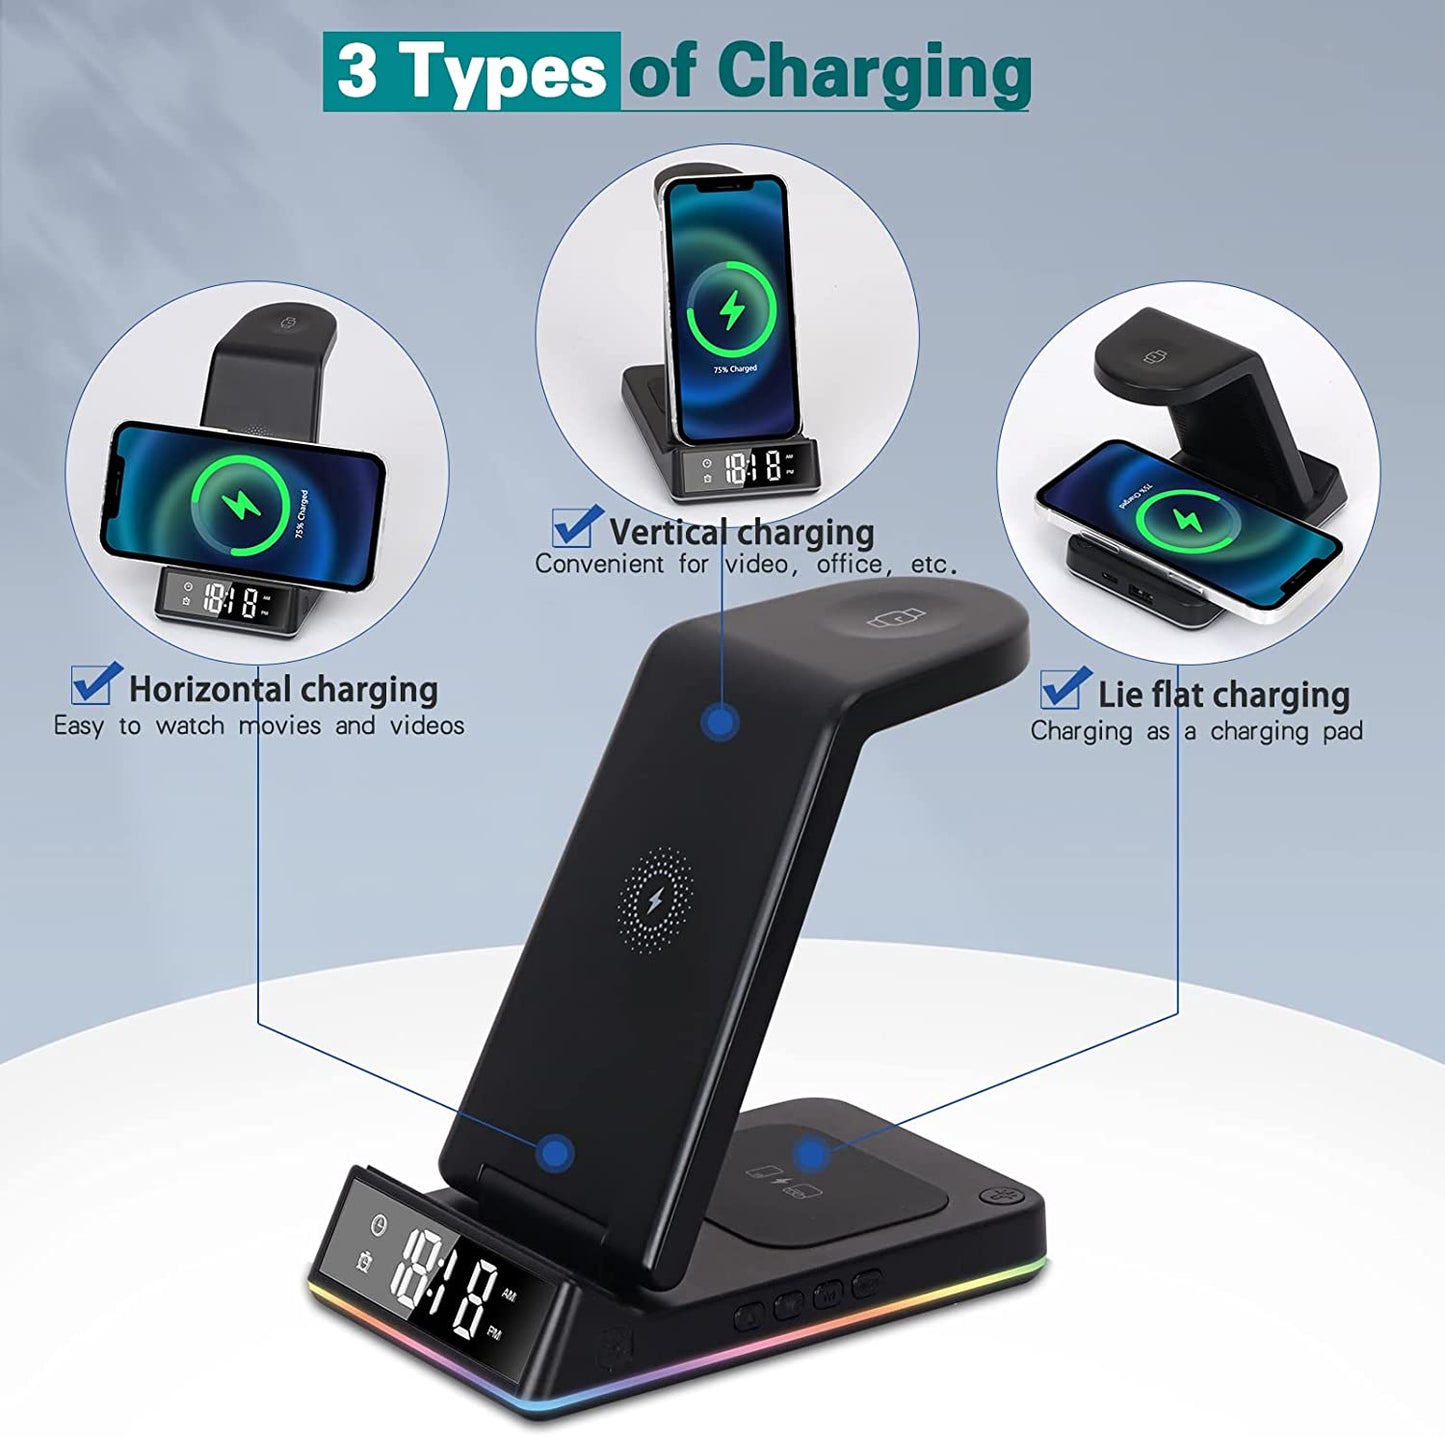 FYY Wireless Charger,5 in 1 Foldable QI Fast Wireless Charging Station Compatible with Iphone 13/12/11 Pro Max/Xs Max/Xr/Xs/X/8/Se,Iwatch Series 7/6/5/4/3/2/Se,Airpods Pro/3/2 - Black